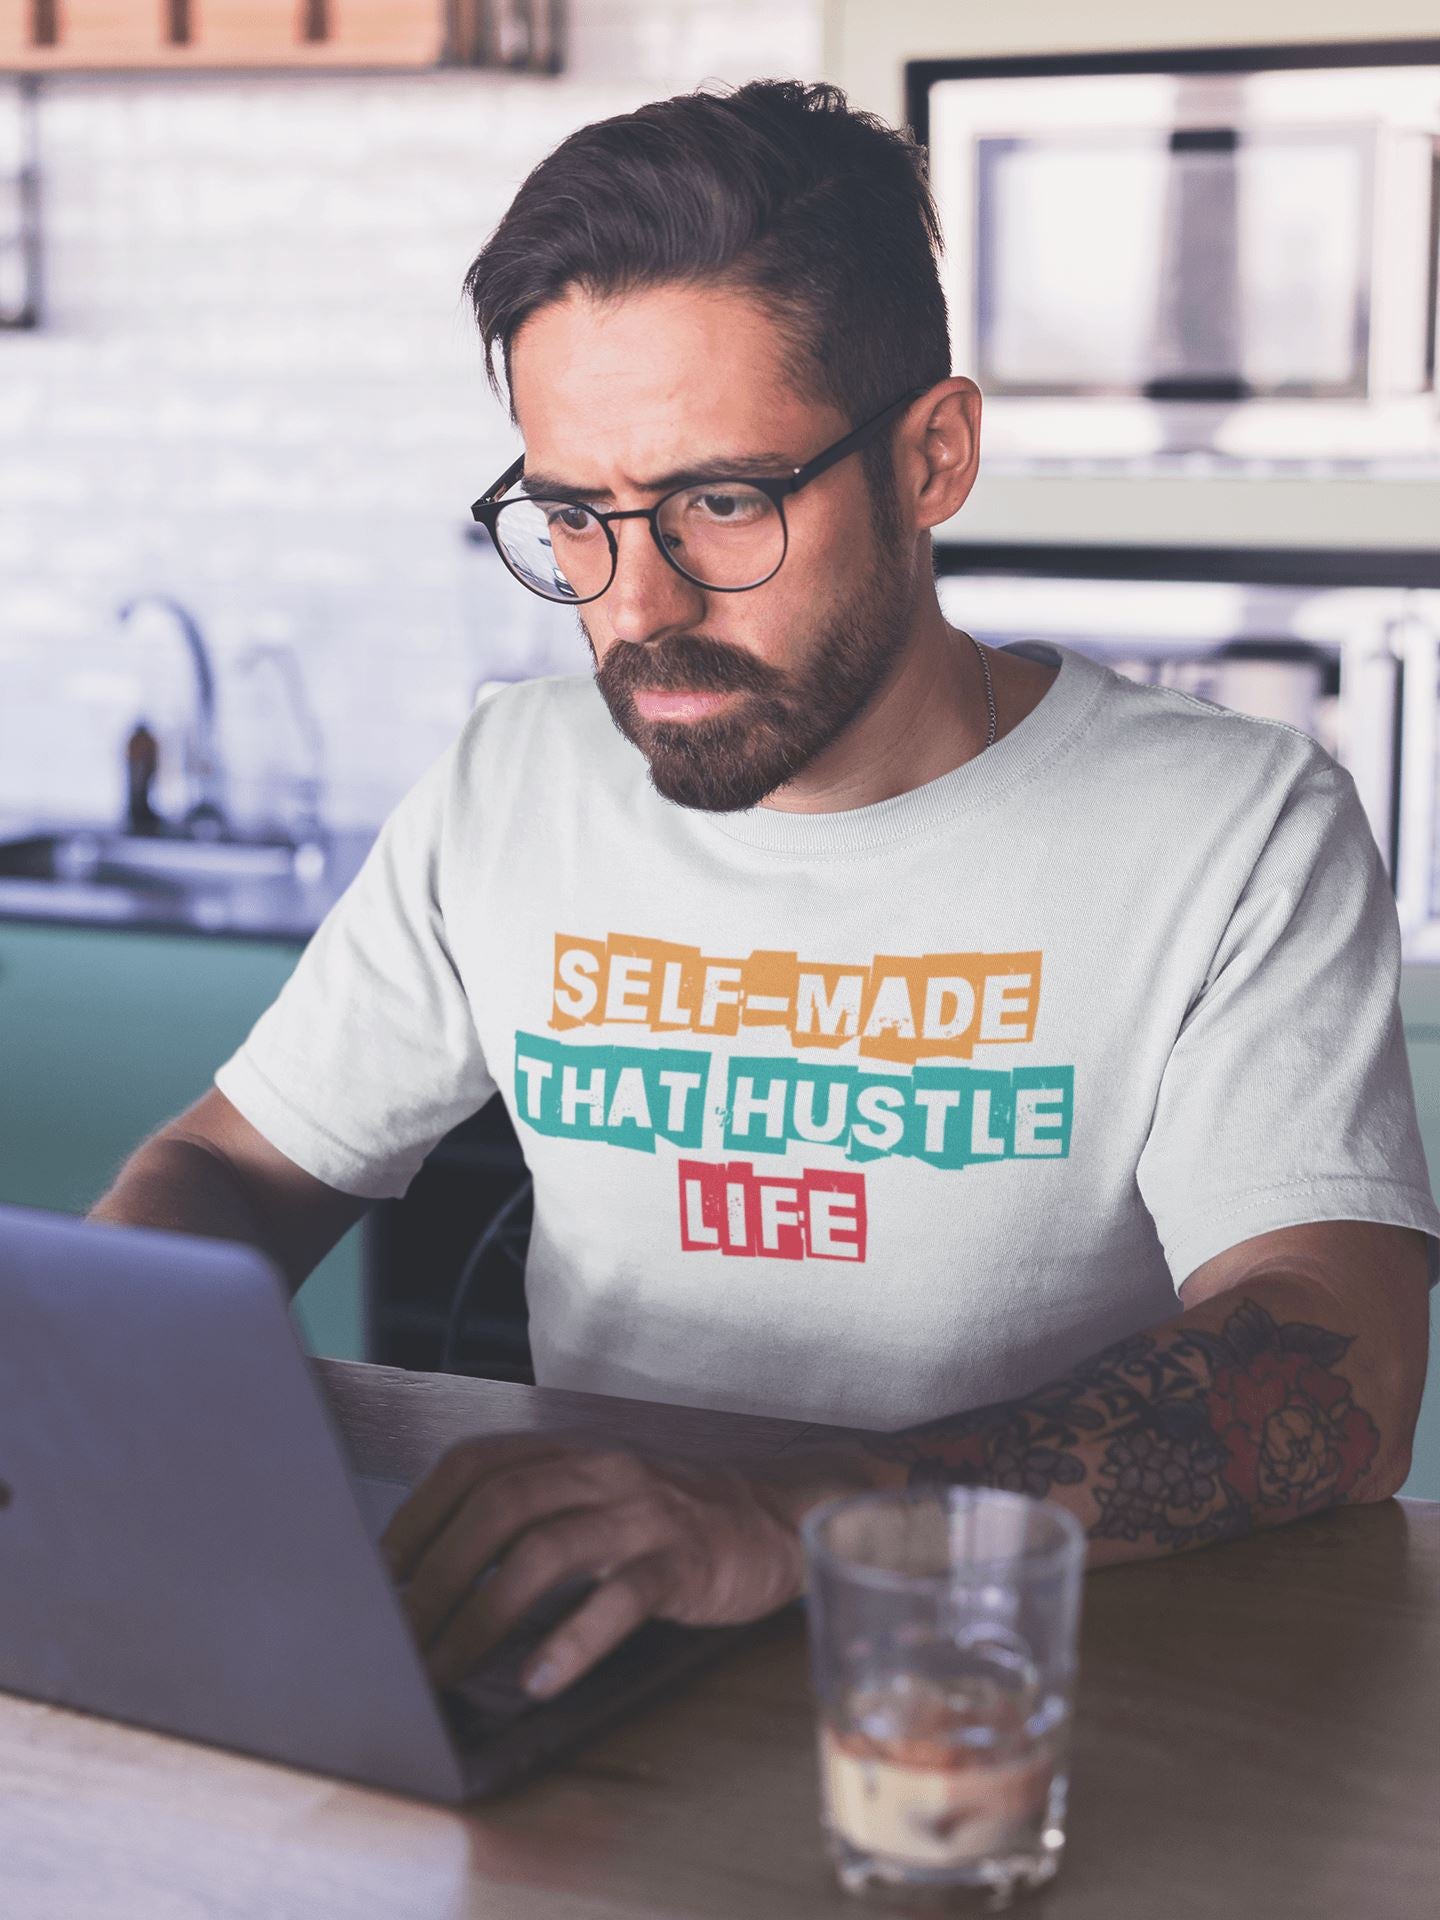 Self Made That Hustle Life Exclusive Supreme T Shirt for Men and Women - Catch My Drift India  activewear, black, clothing, made in india, motivation, shirt, stock, stock market, t shirt, tra